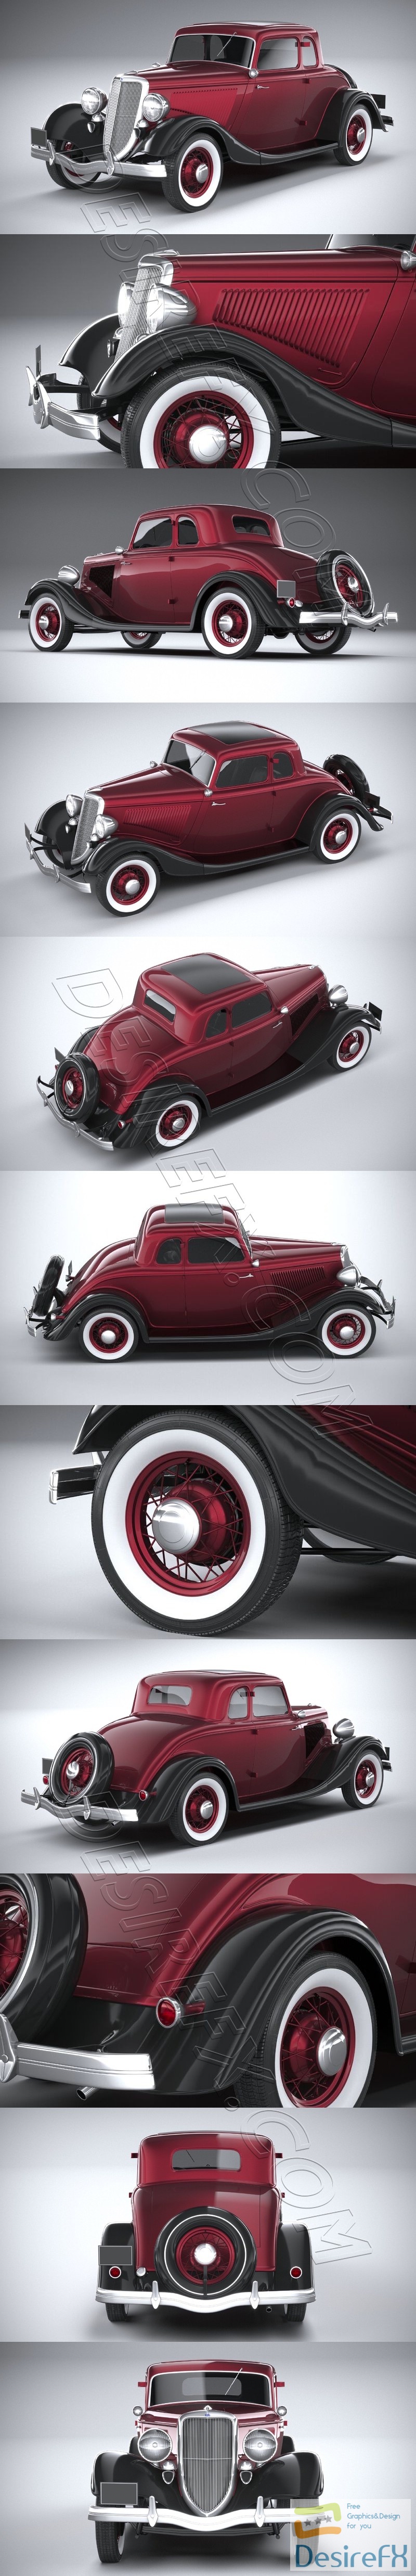 Ford Coupe 1934 3D Model